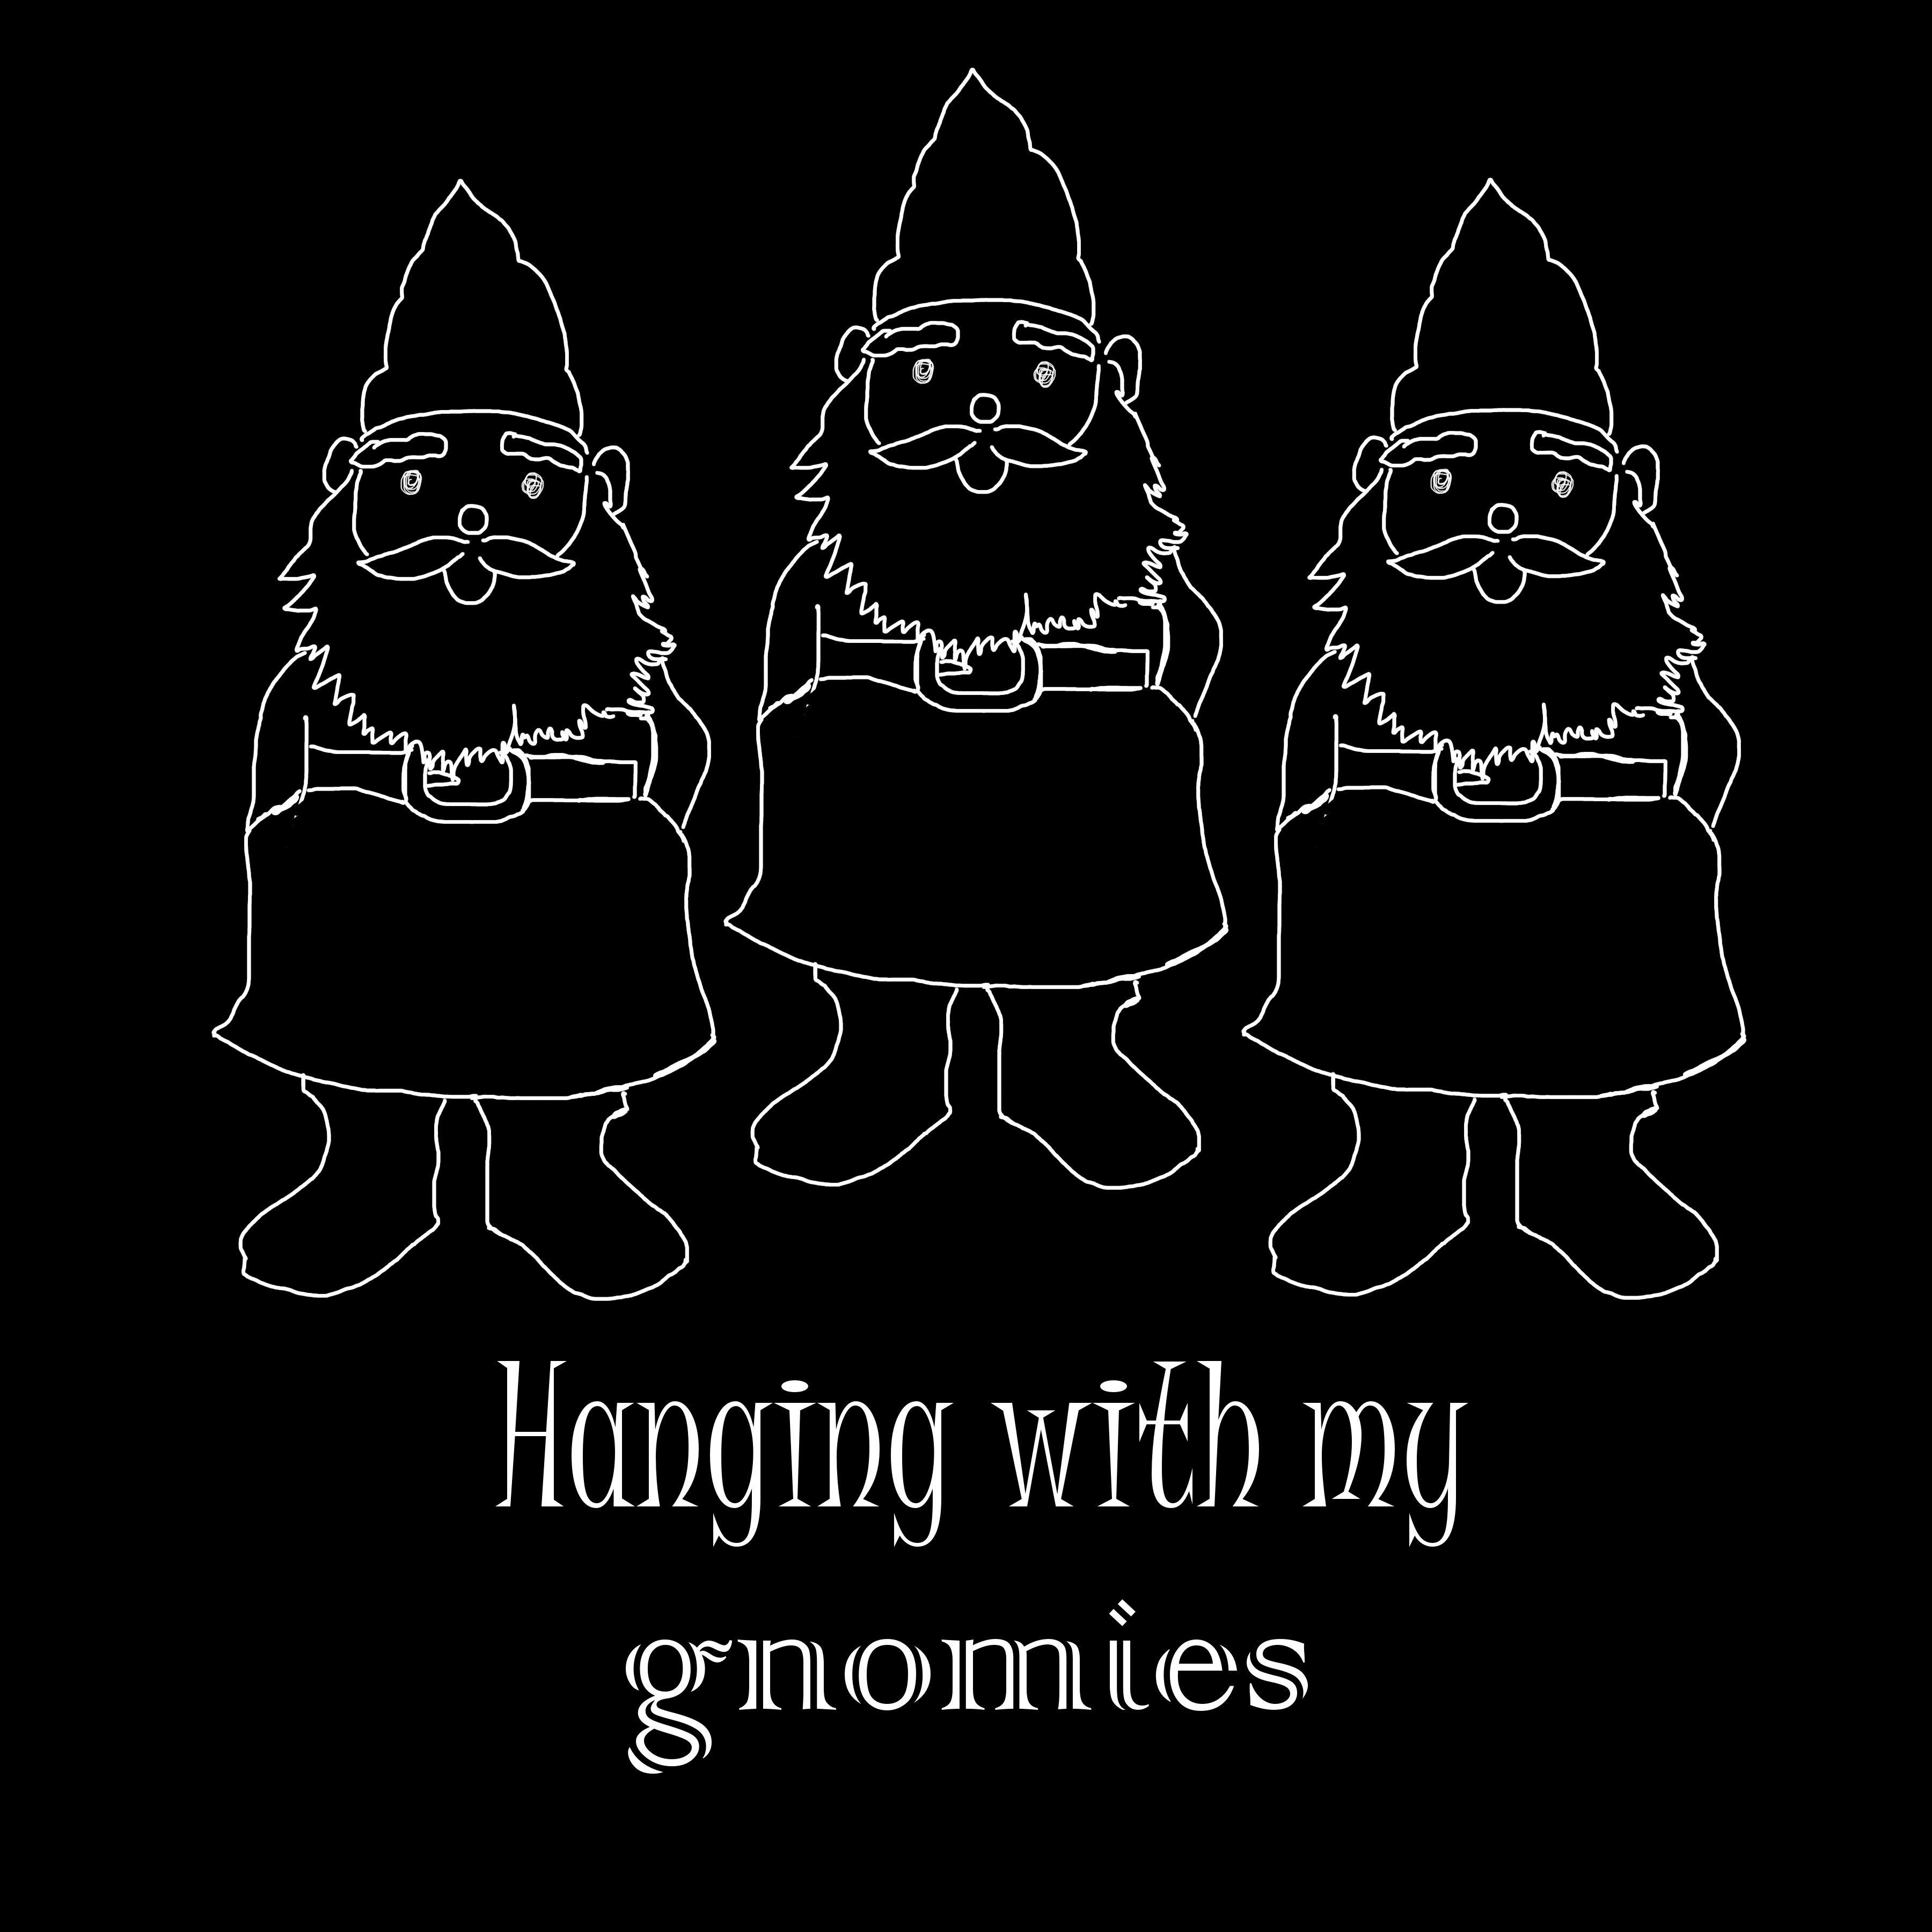 monochrome - Hanging with my gnomies